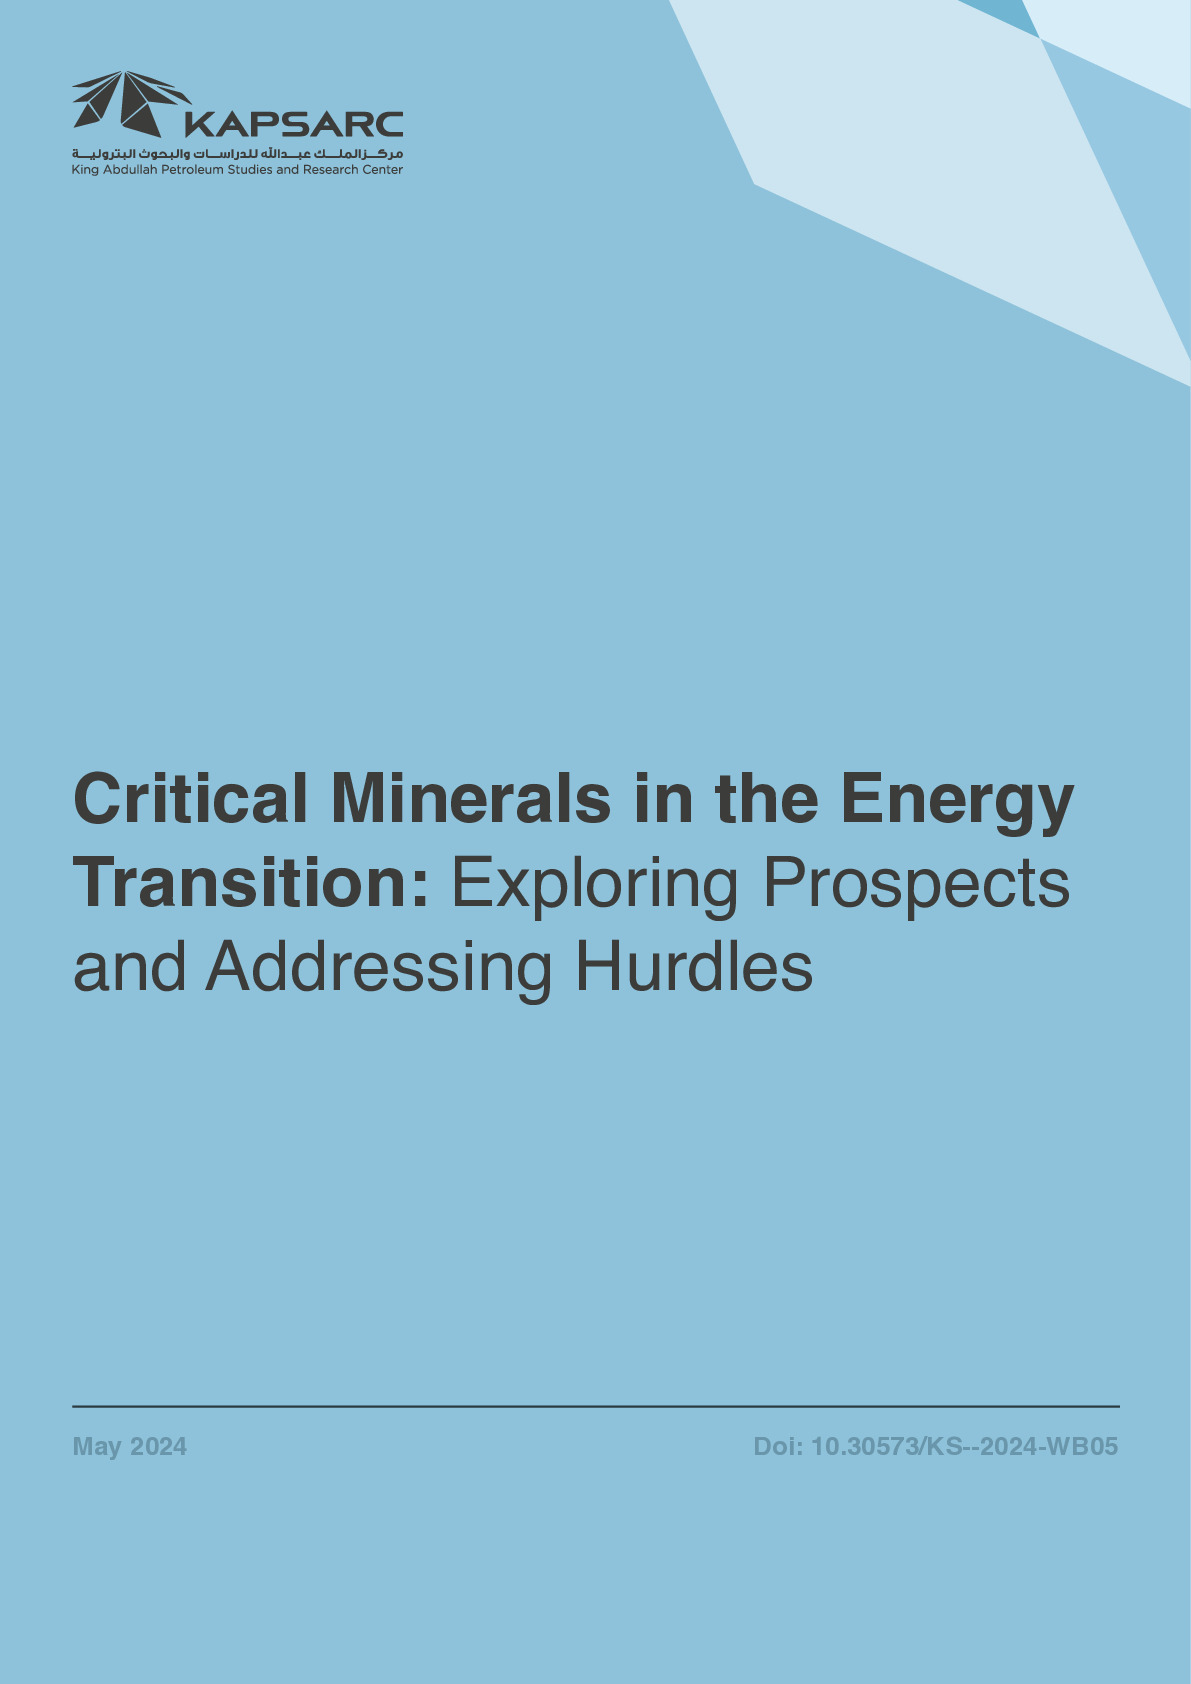 Critical Minerals in the Energy Transition: Exploring Prospects and Addressing Hurdles